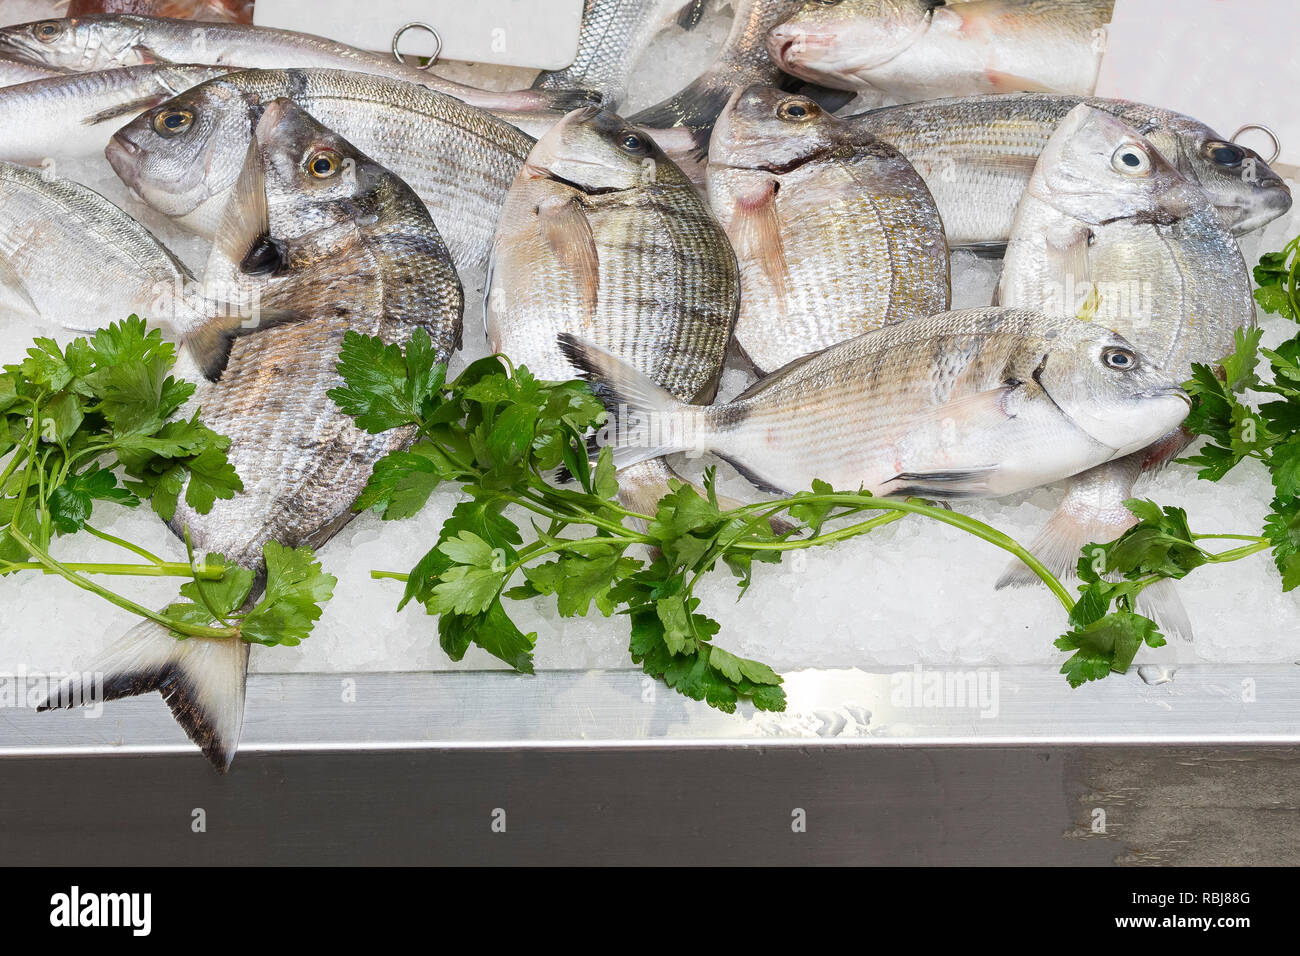 Group of fresh sargo or white seabream (diplodus sargus) and parsley  on ice for sale at a fish market Stock Photo